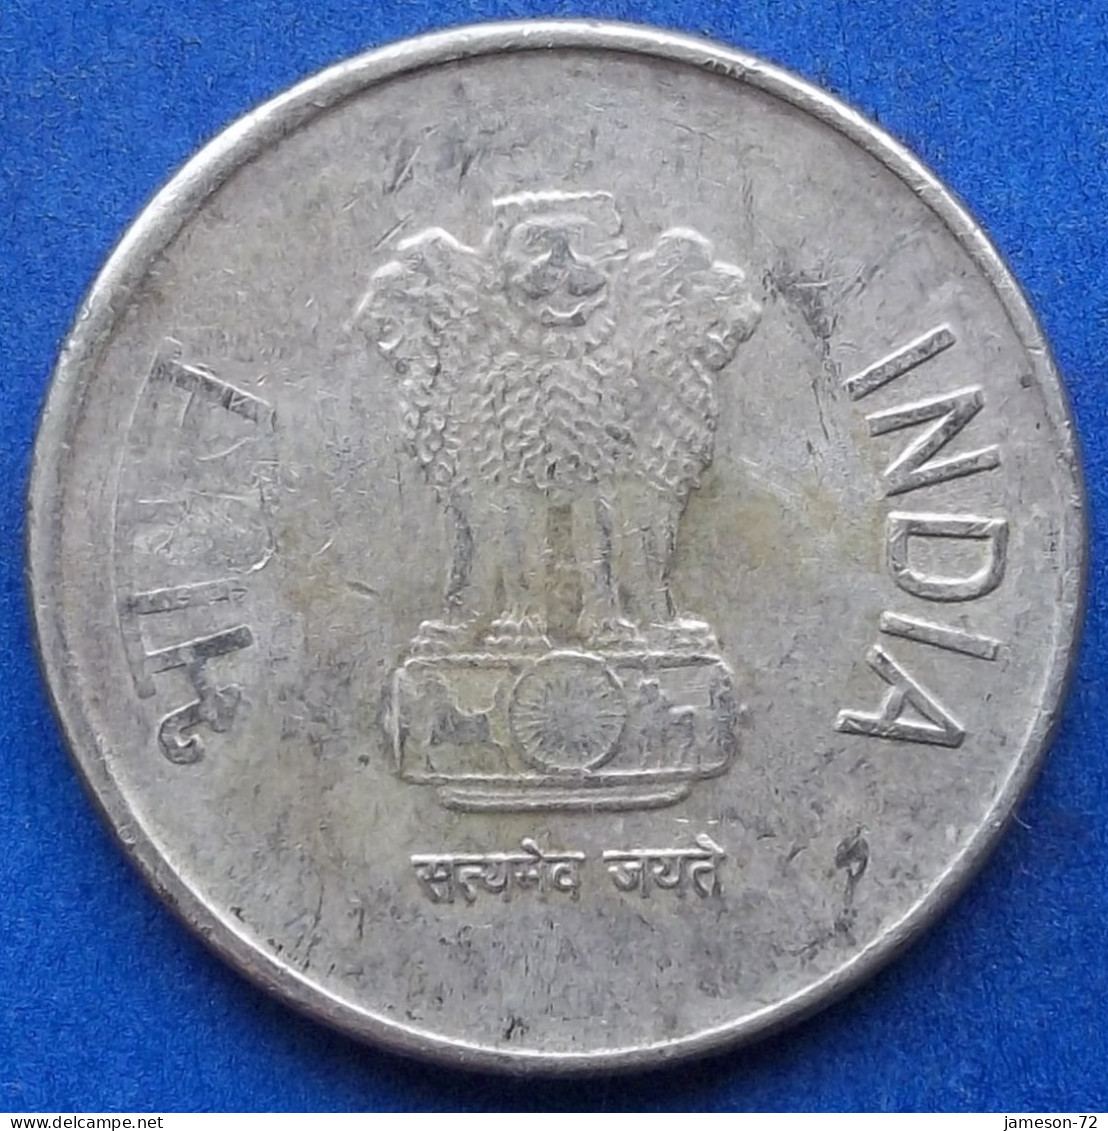 INDIA - 5 Rupees 2016 "Lotus Flowers" KM# 399.1 Republic Decimal Coinage (1957) - Edelweiss Coins - Georgien